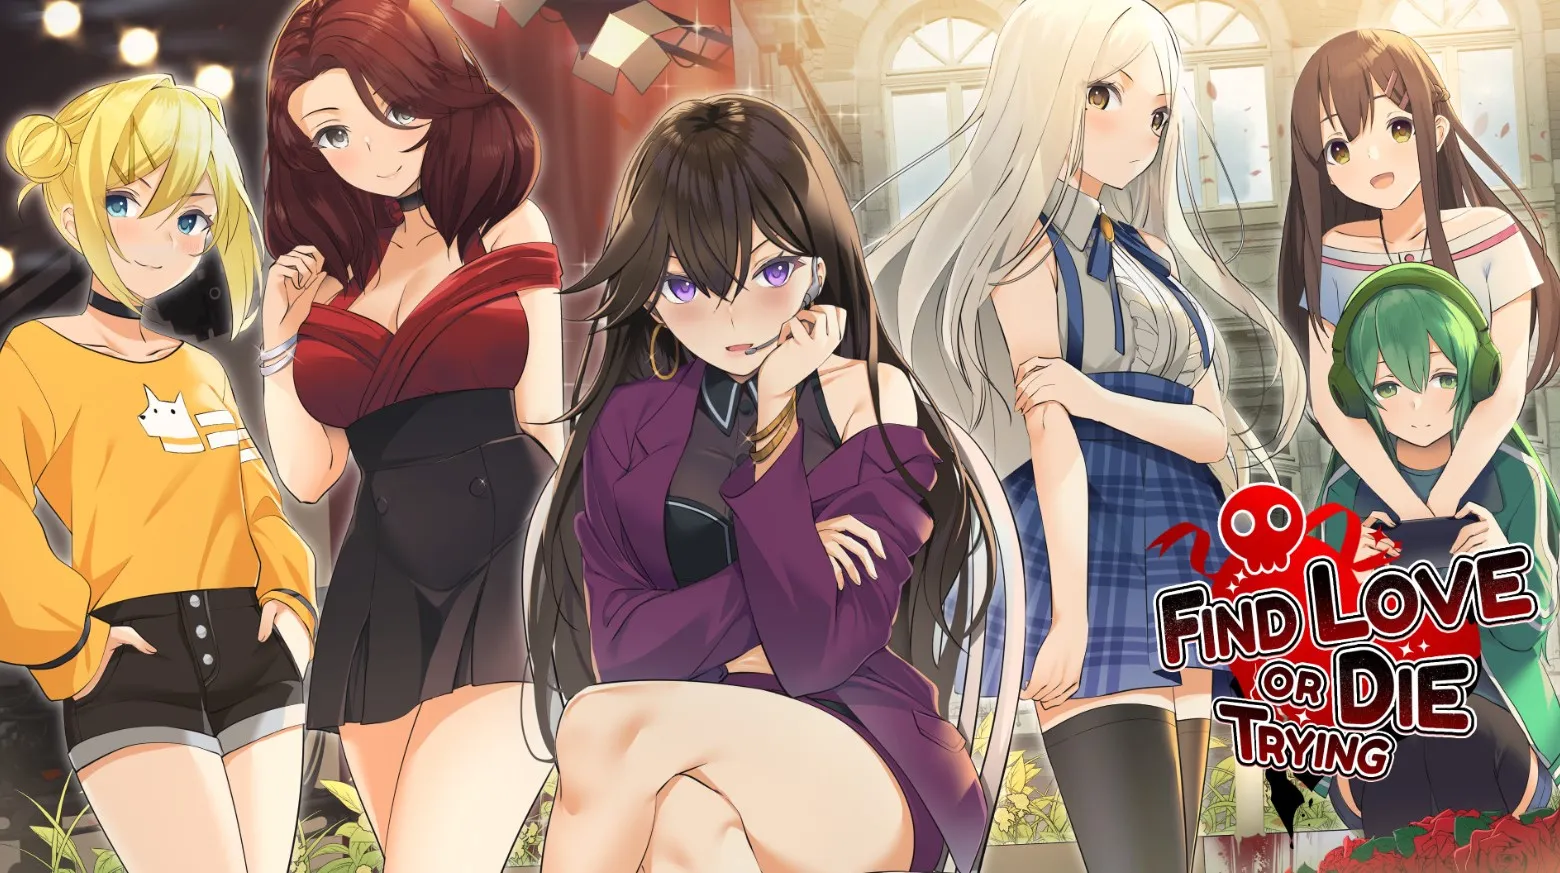 Game Anime Free-to-Play di Steam: Find love or die trying